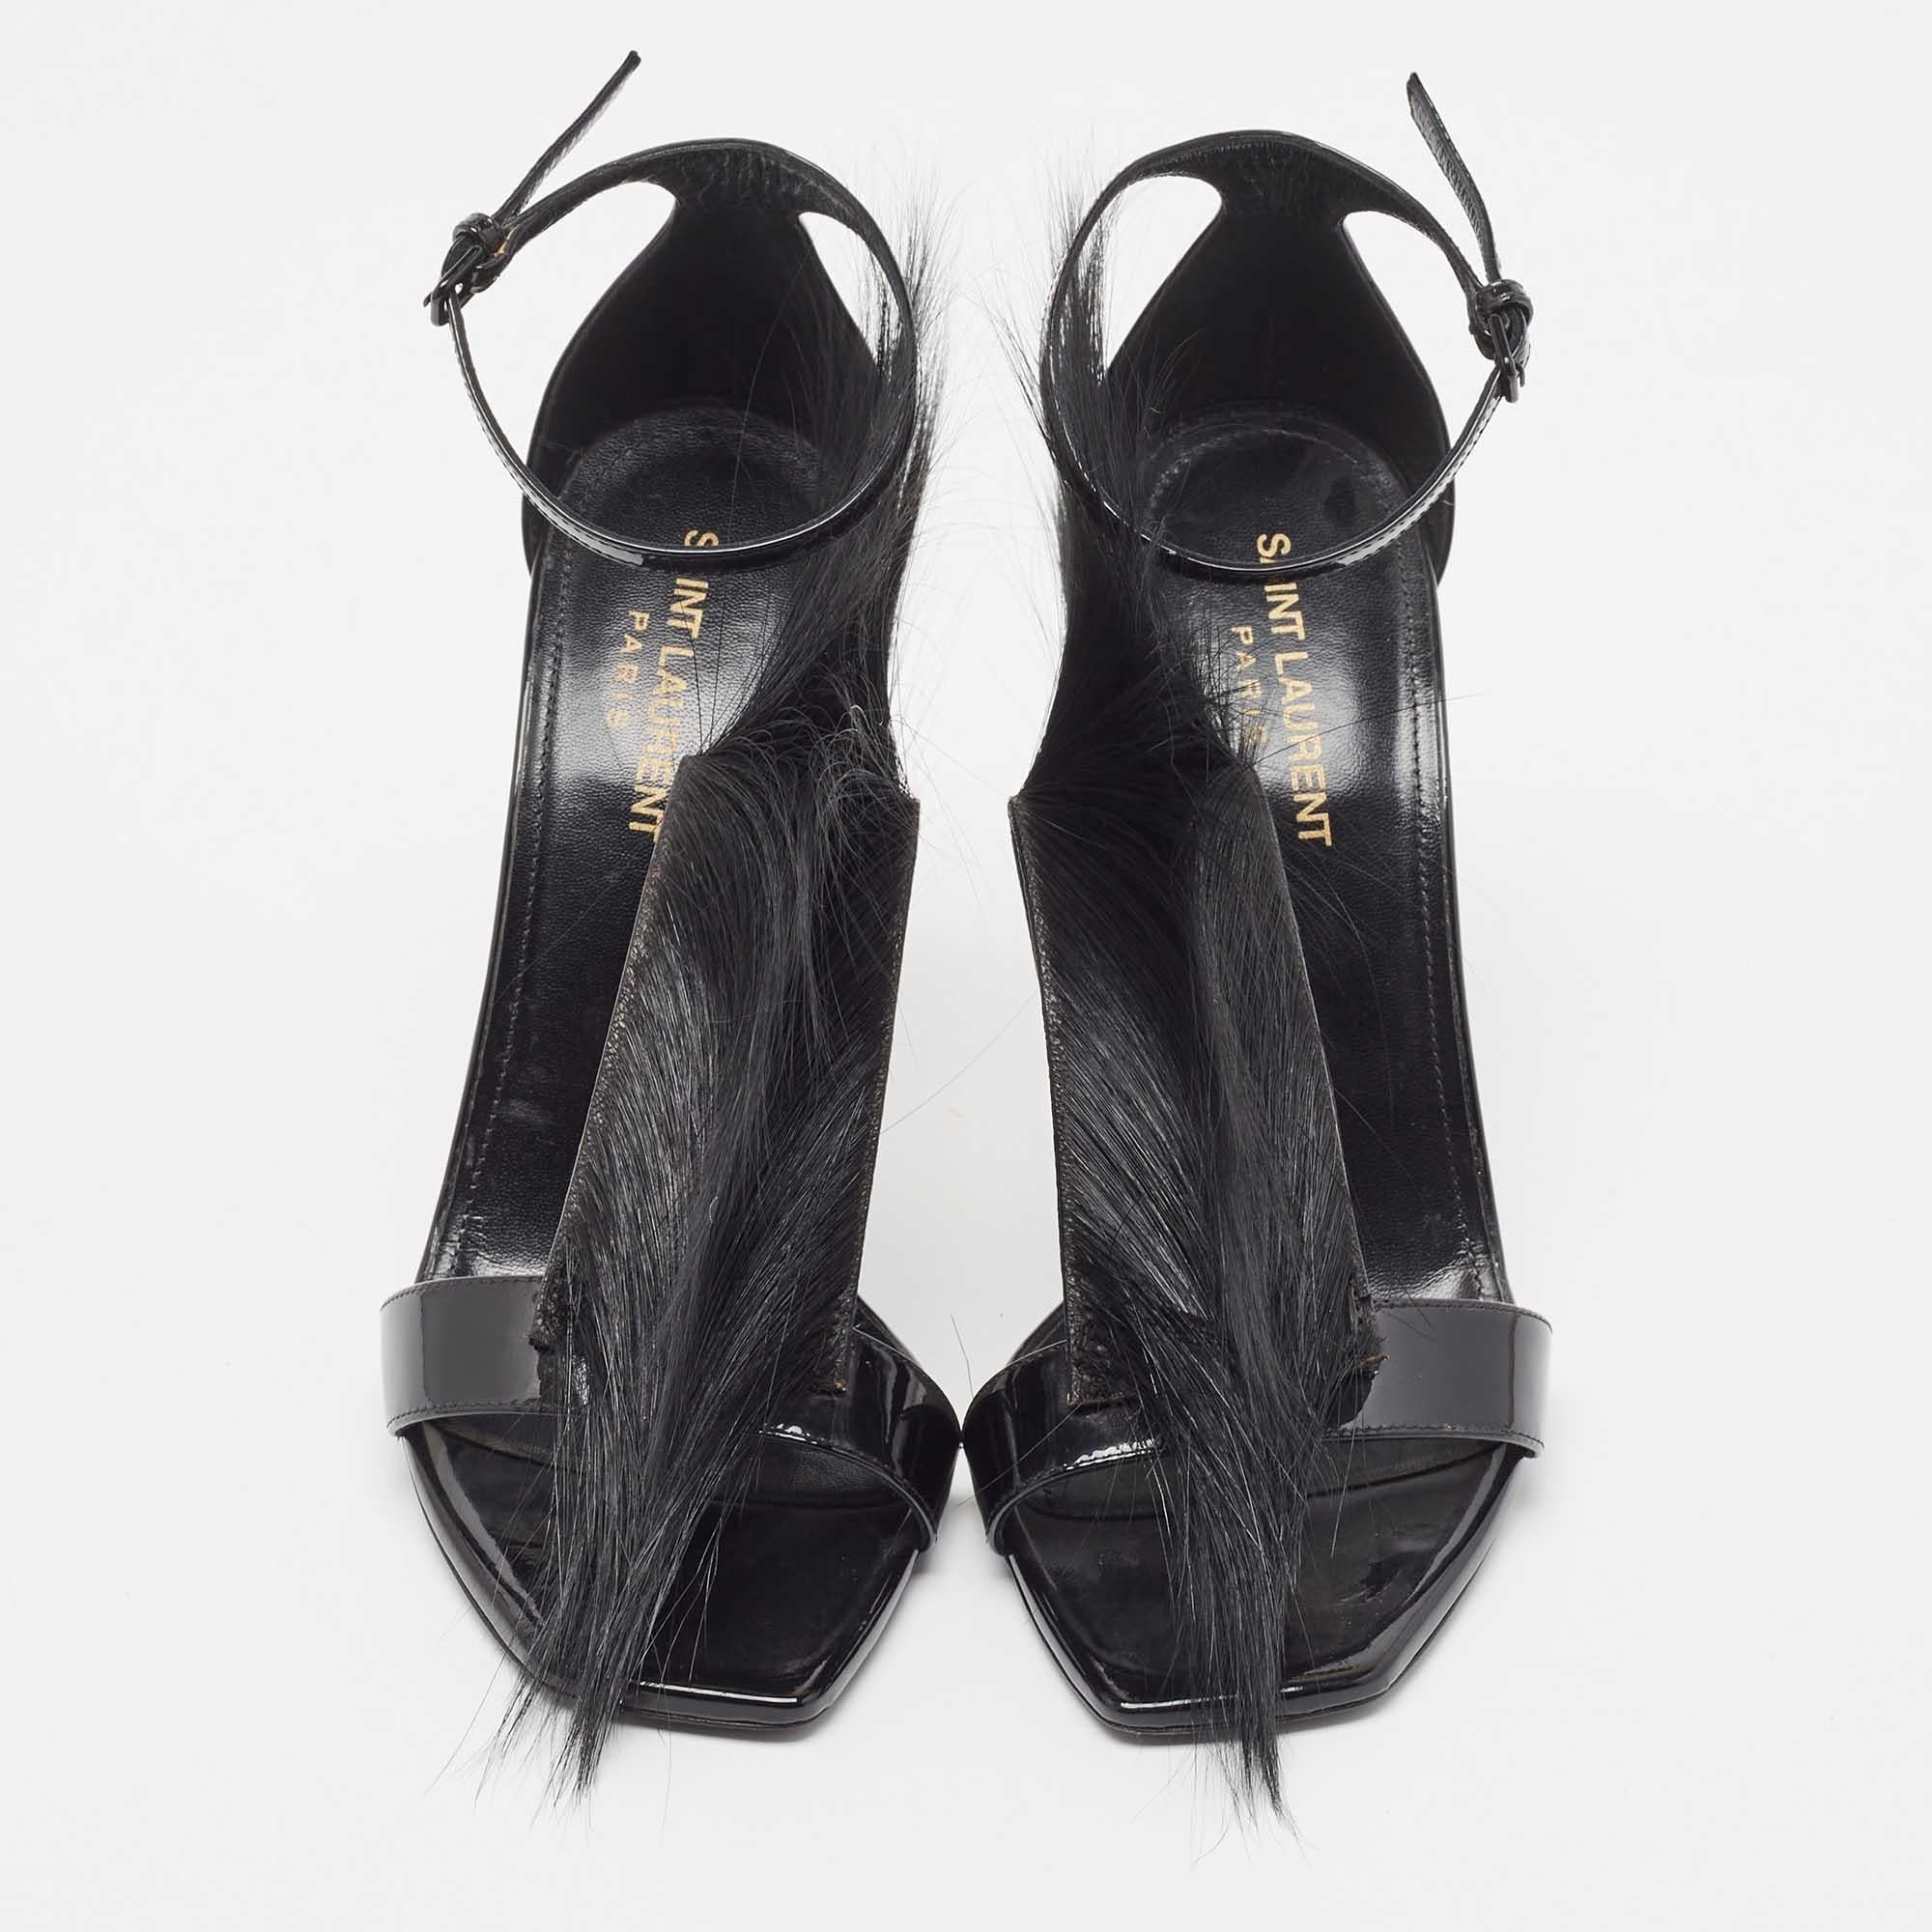 Deliver statement looks with these sandals from Saint Laurent! From their shape and detailing to their overall appeal, they exude elegance. The sandals feature open toes, fur detailing, ankle strap closure, and stiletto heels.

